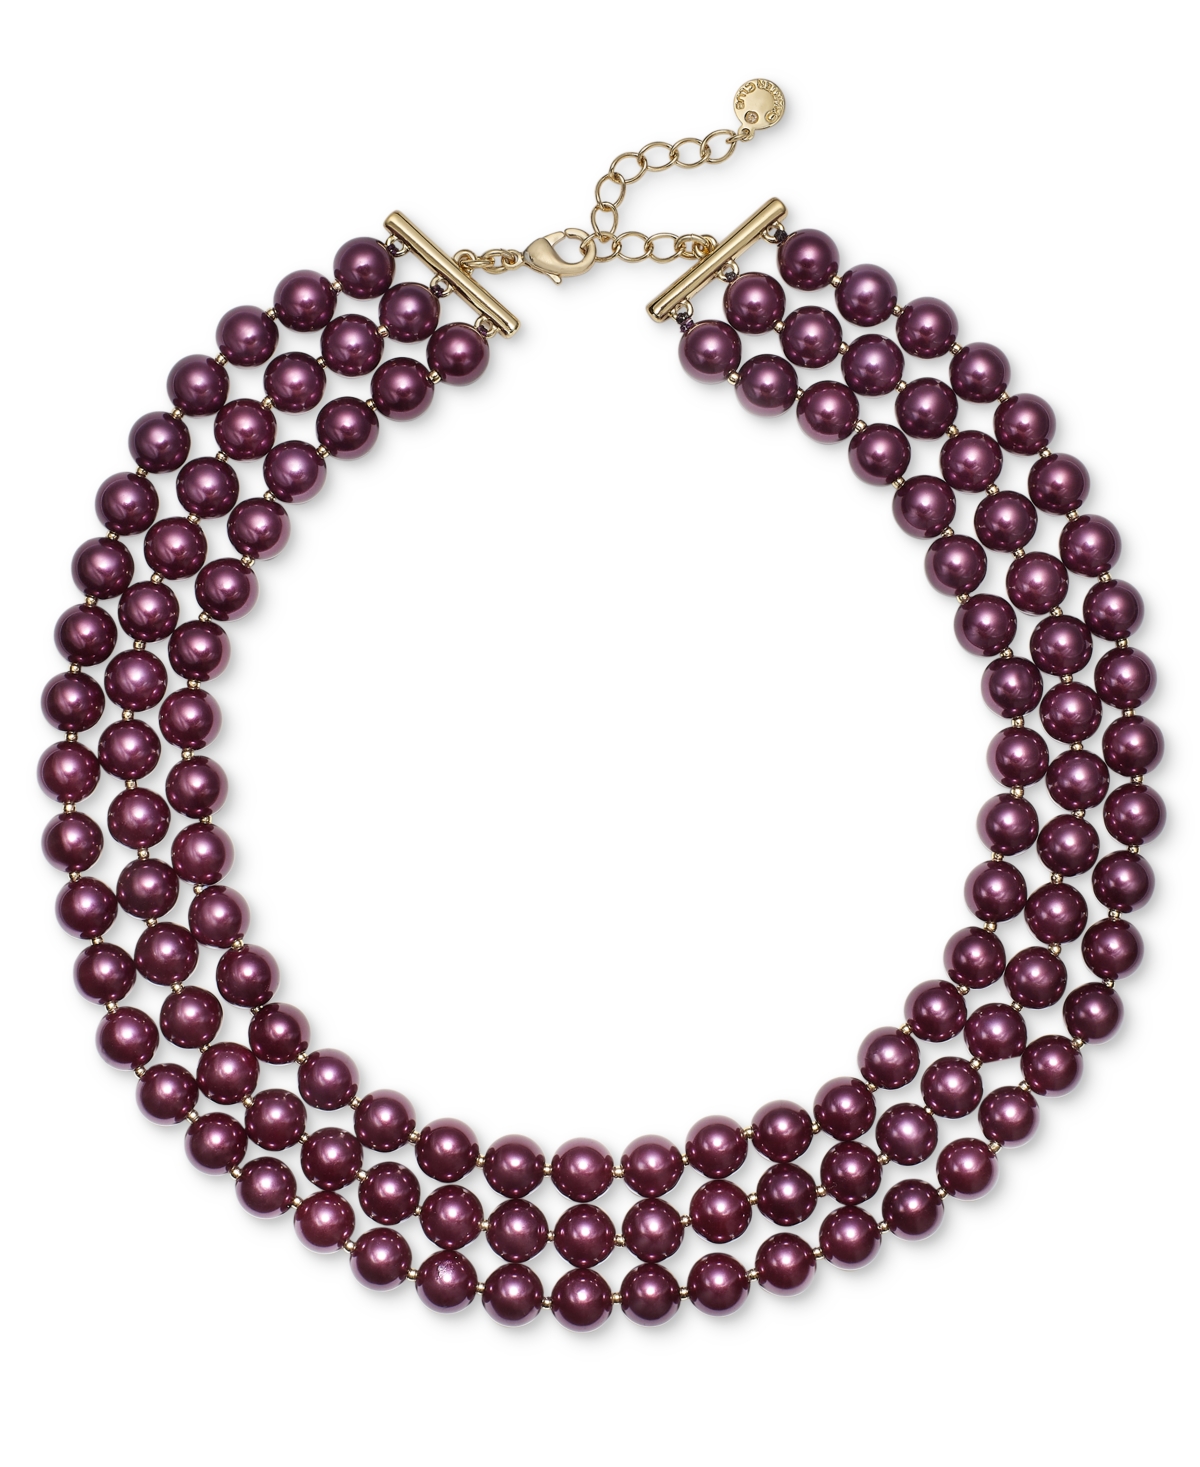 Gold-Tone Color Imitation Pearl Collar Necklace, 17" + 2" extender, Created for Macy's - Purple